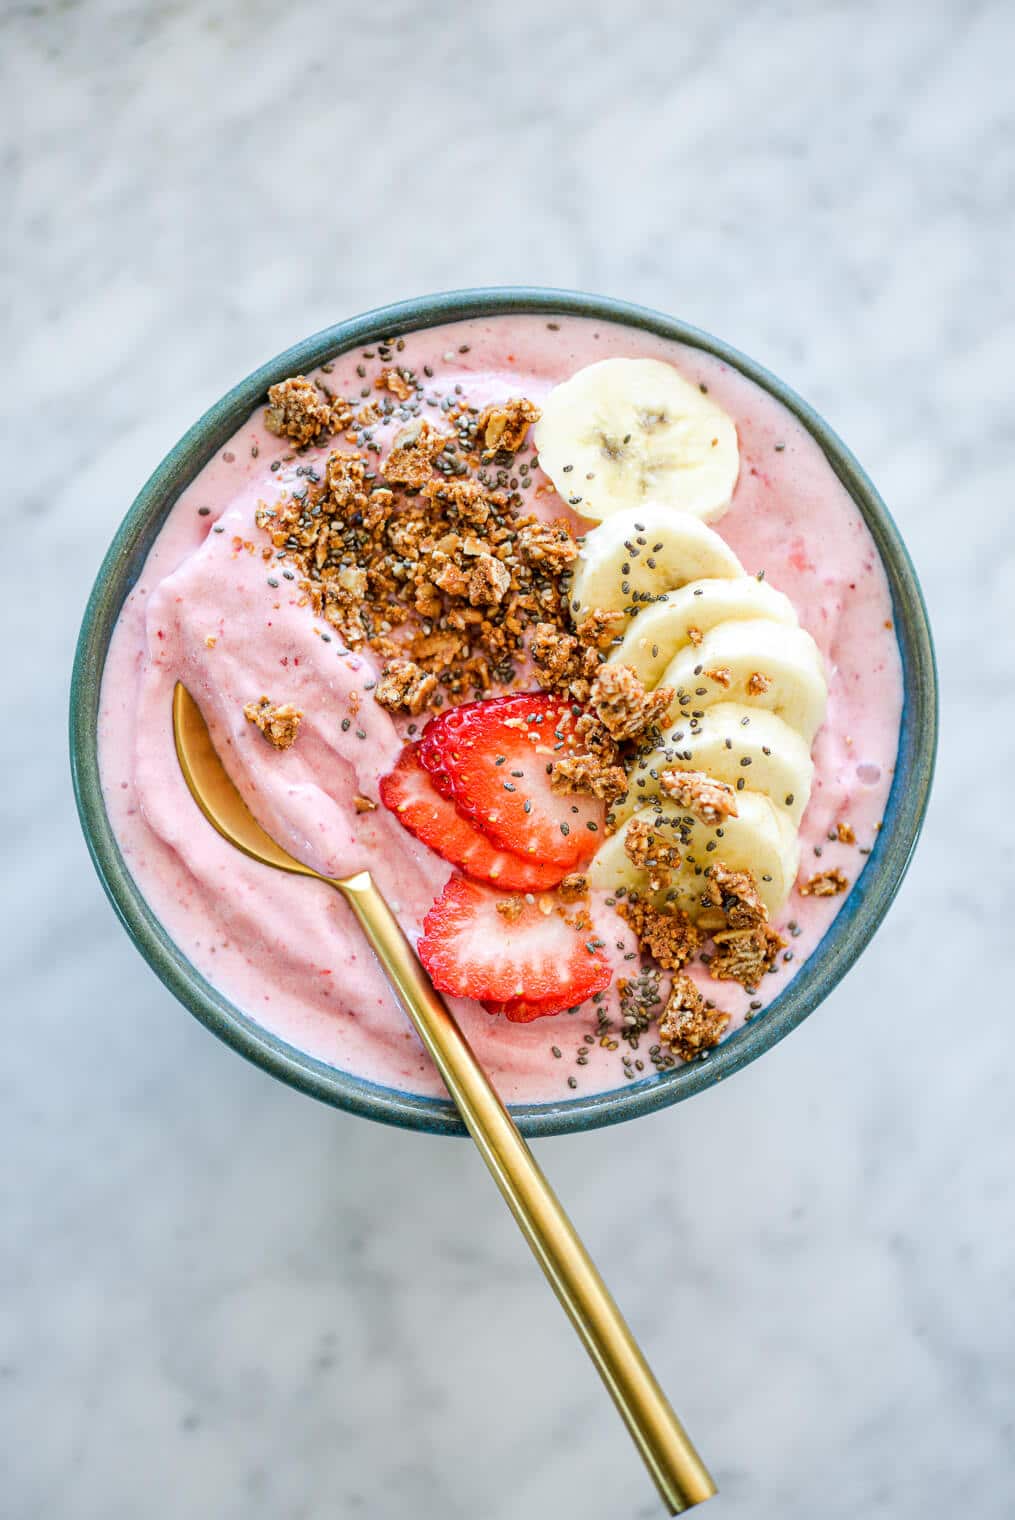 Strawberry smoothie with gold spoon in bowl topped with sliced banana, sliced strawberry, granola, and chia seeds